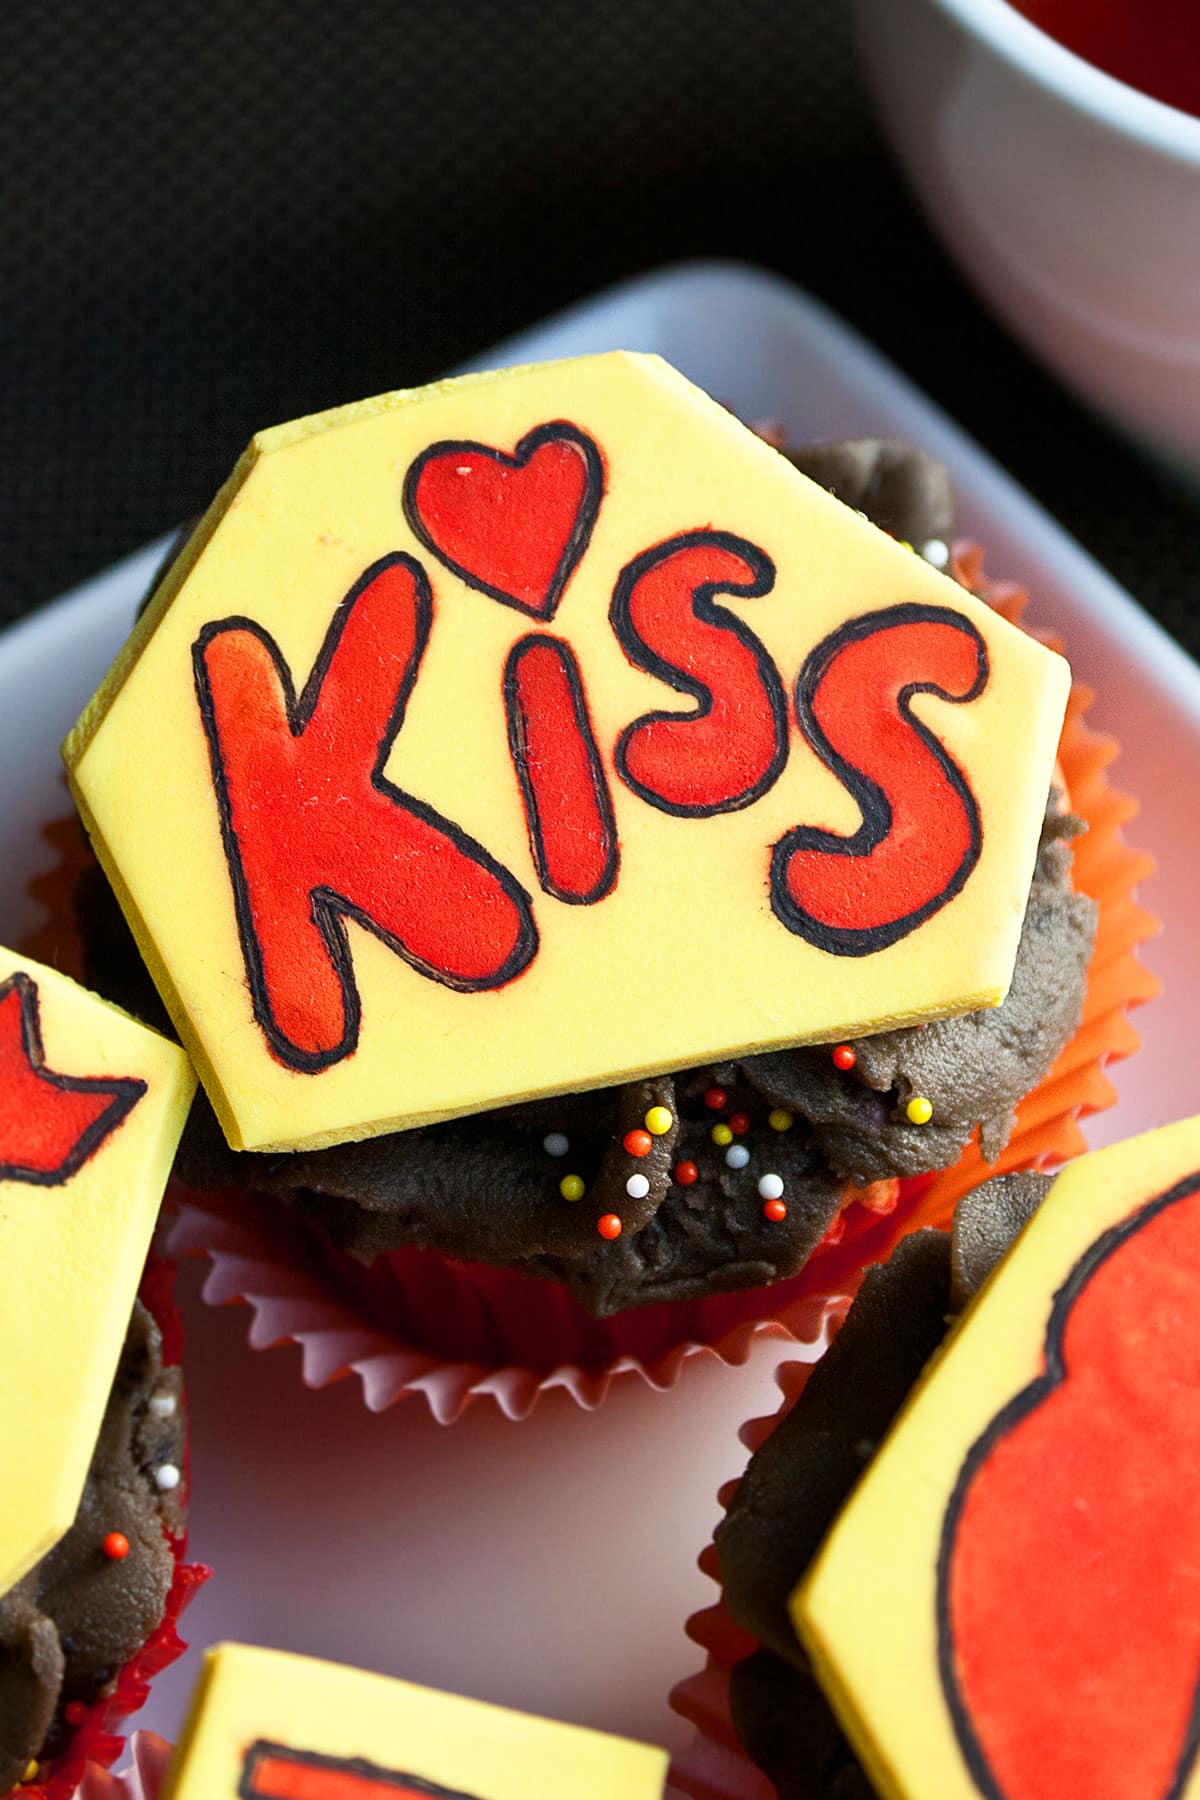 Kiss Cupcakes Decorated With Fondant and Stencils on White Dish